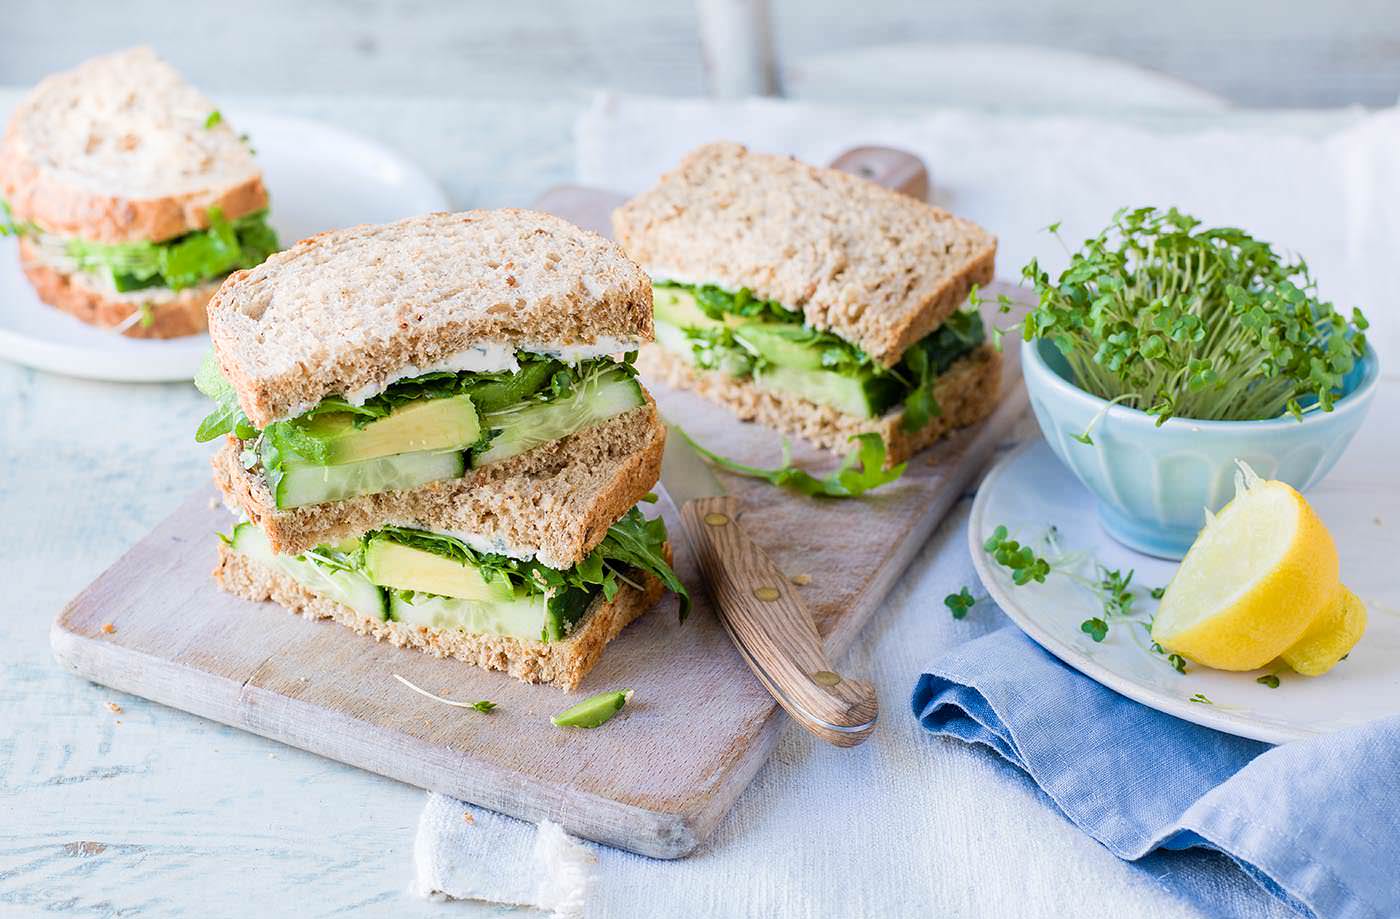 This gloriously green sarnie is sure to rouse some serious lunch envy